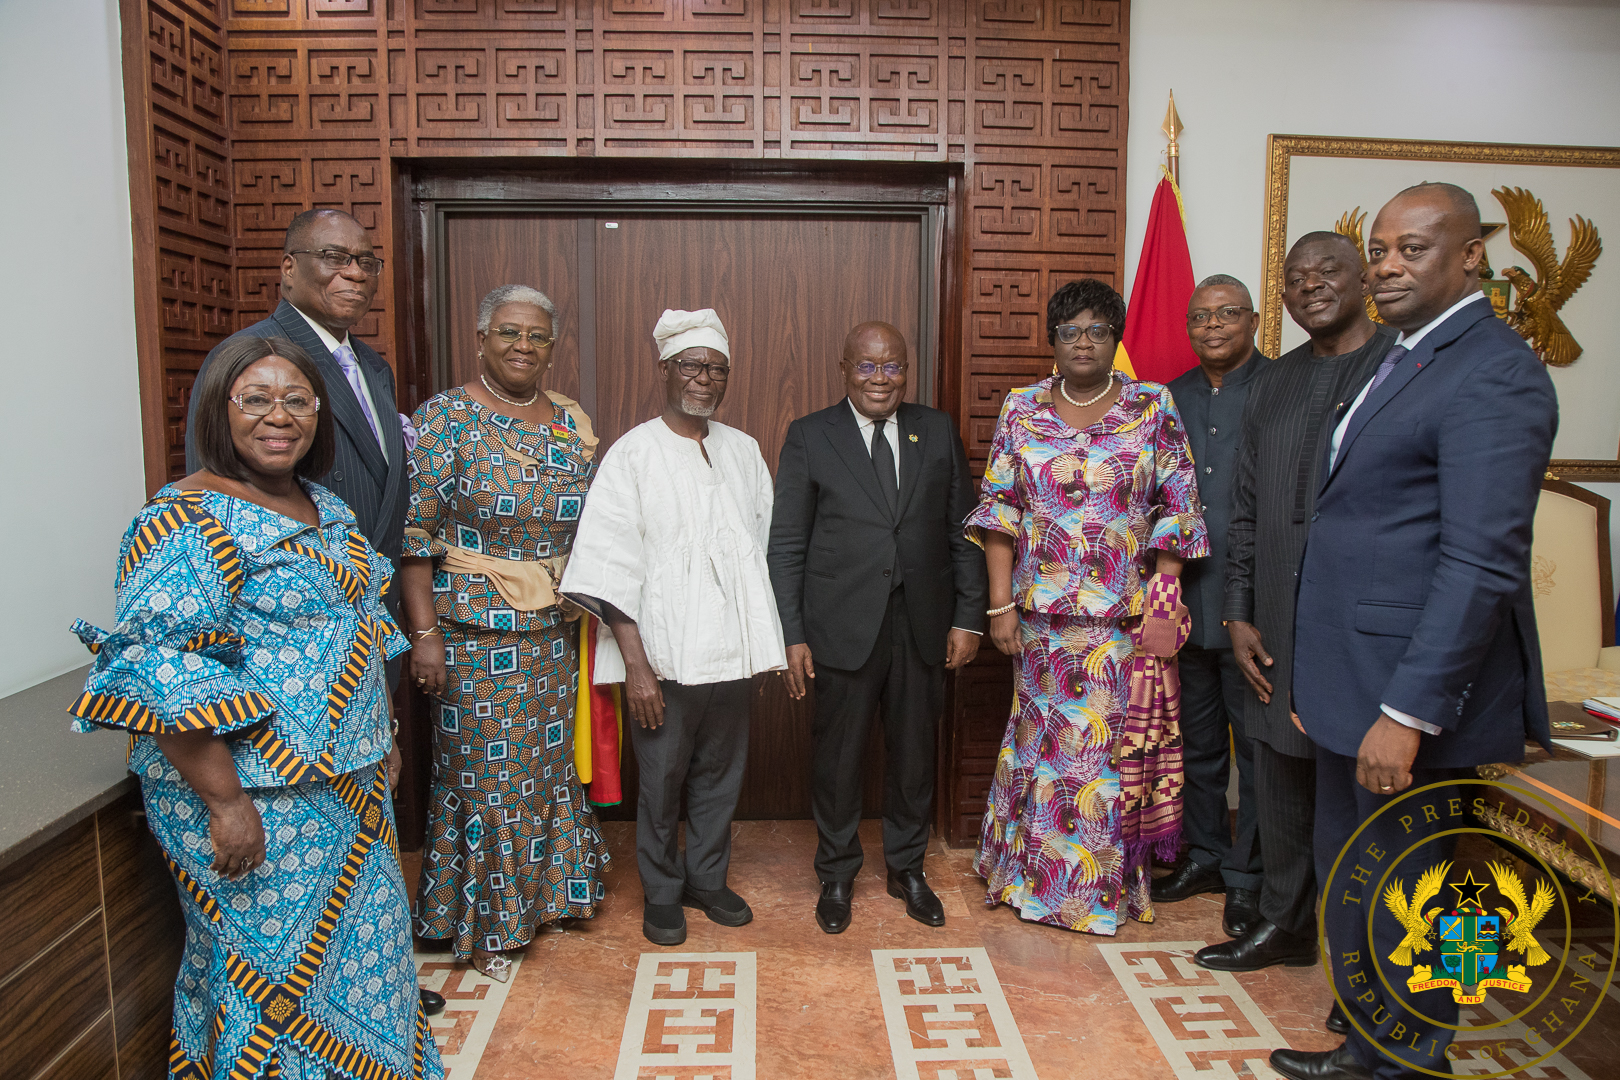 New Ghana African Peer Review Mechanism Governing Council sworn into office